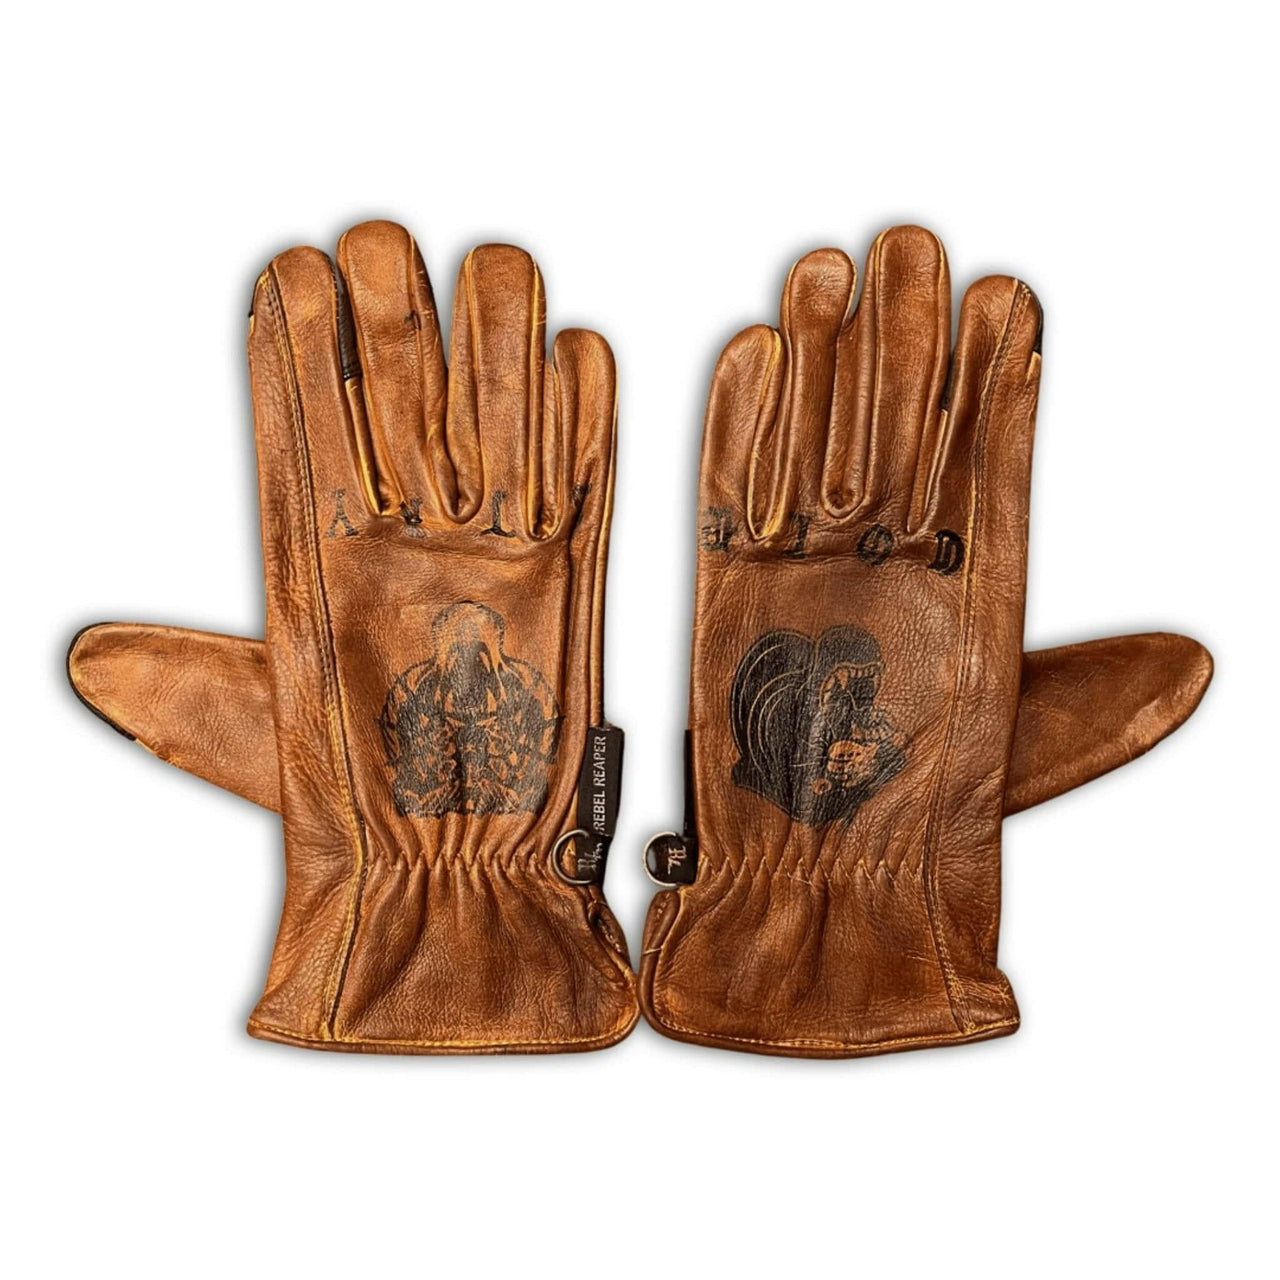 Leather Motorcycle Riding Gloves - Classic Roper - Distressed Brown - Rebel Reaper Clothing CompanyLeather Gloves